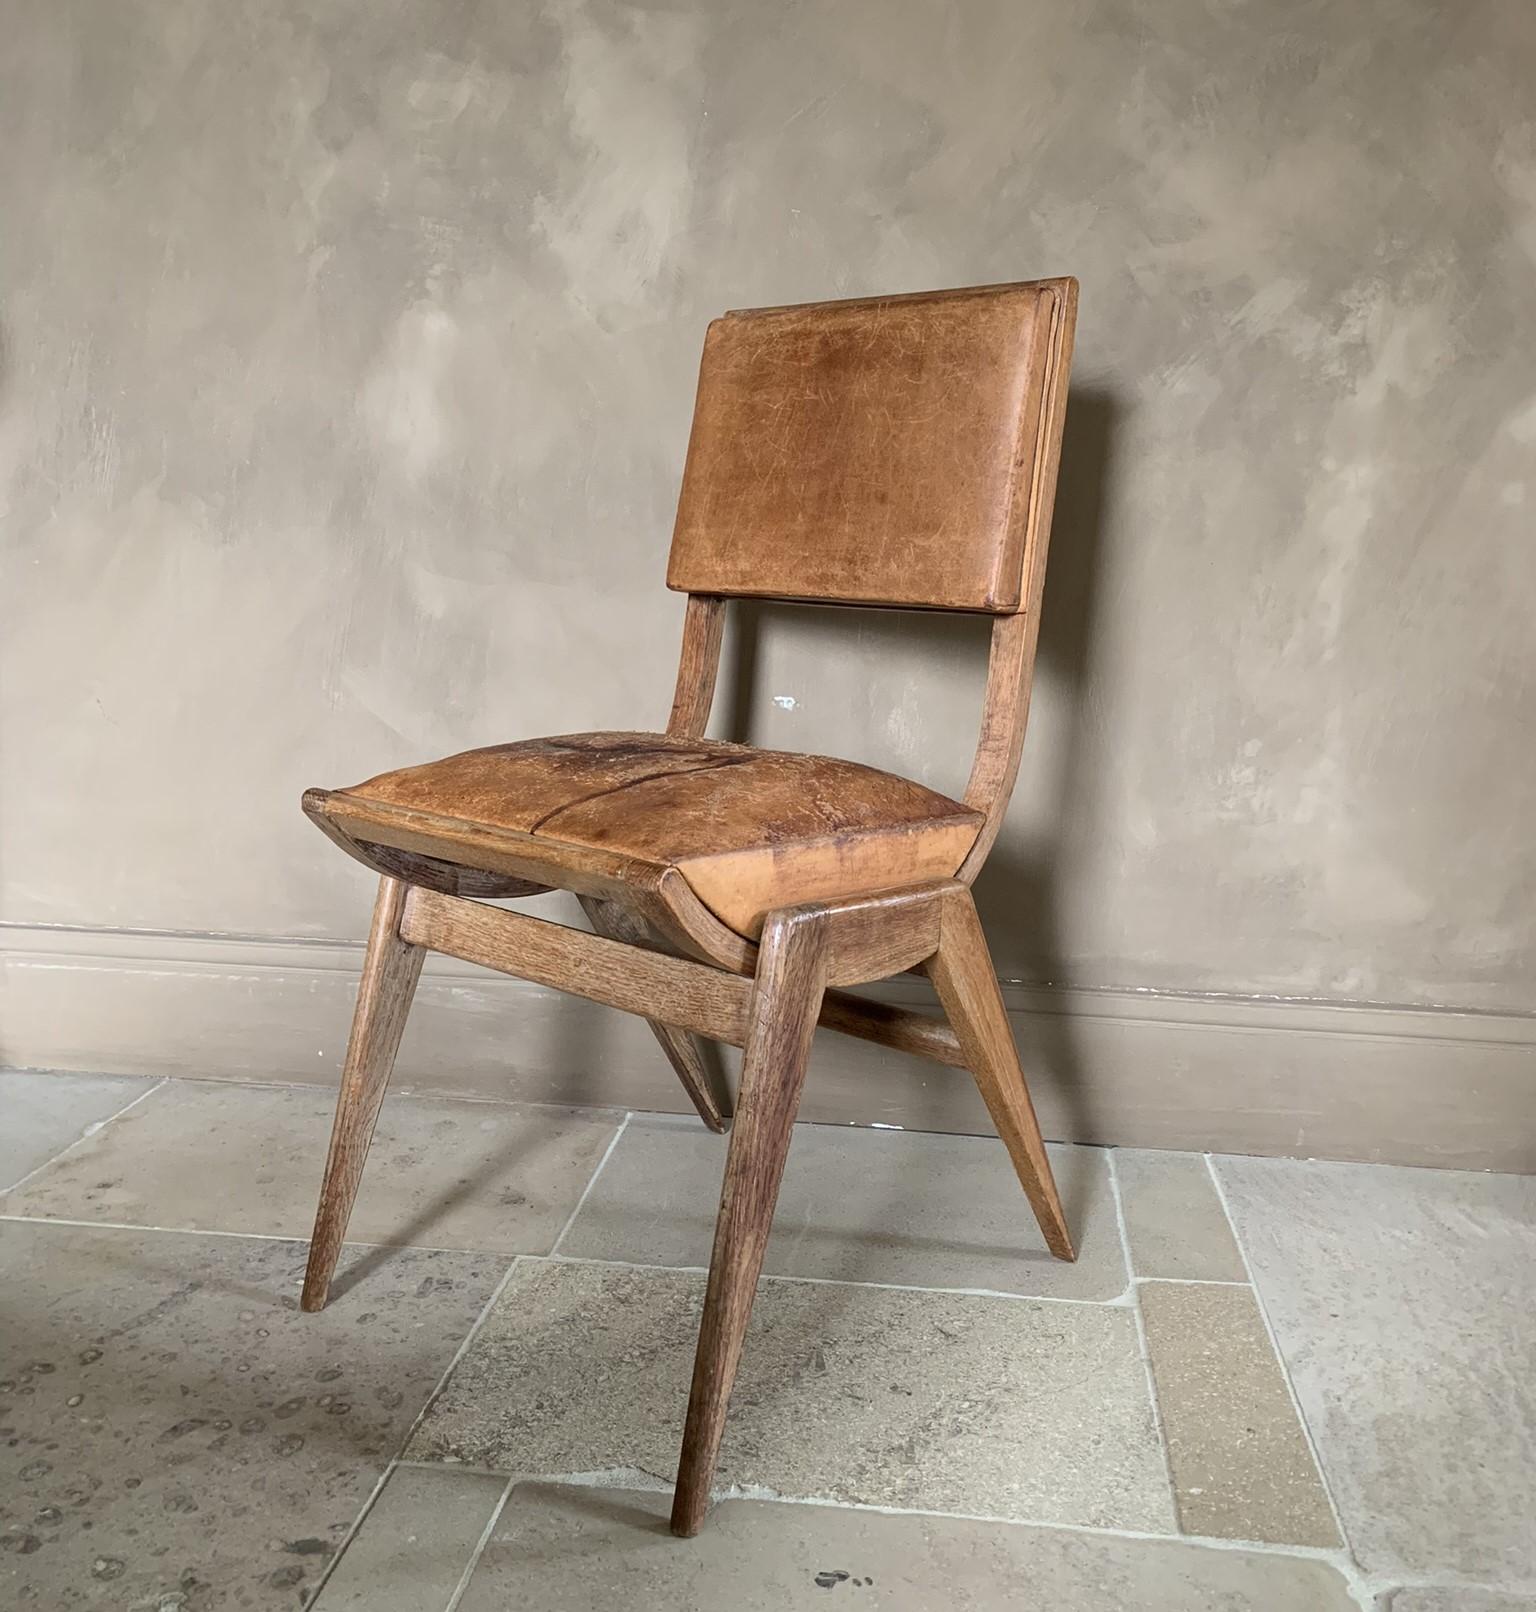 This midcentury modernist chair is just perfect in every way. The build quality is exceptional and probably executed by a master craftsman. As it is completely constructed out of solid oak and the proportions are dead on this is probably a one of